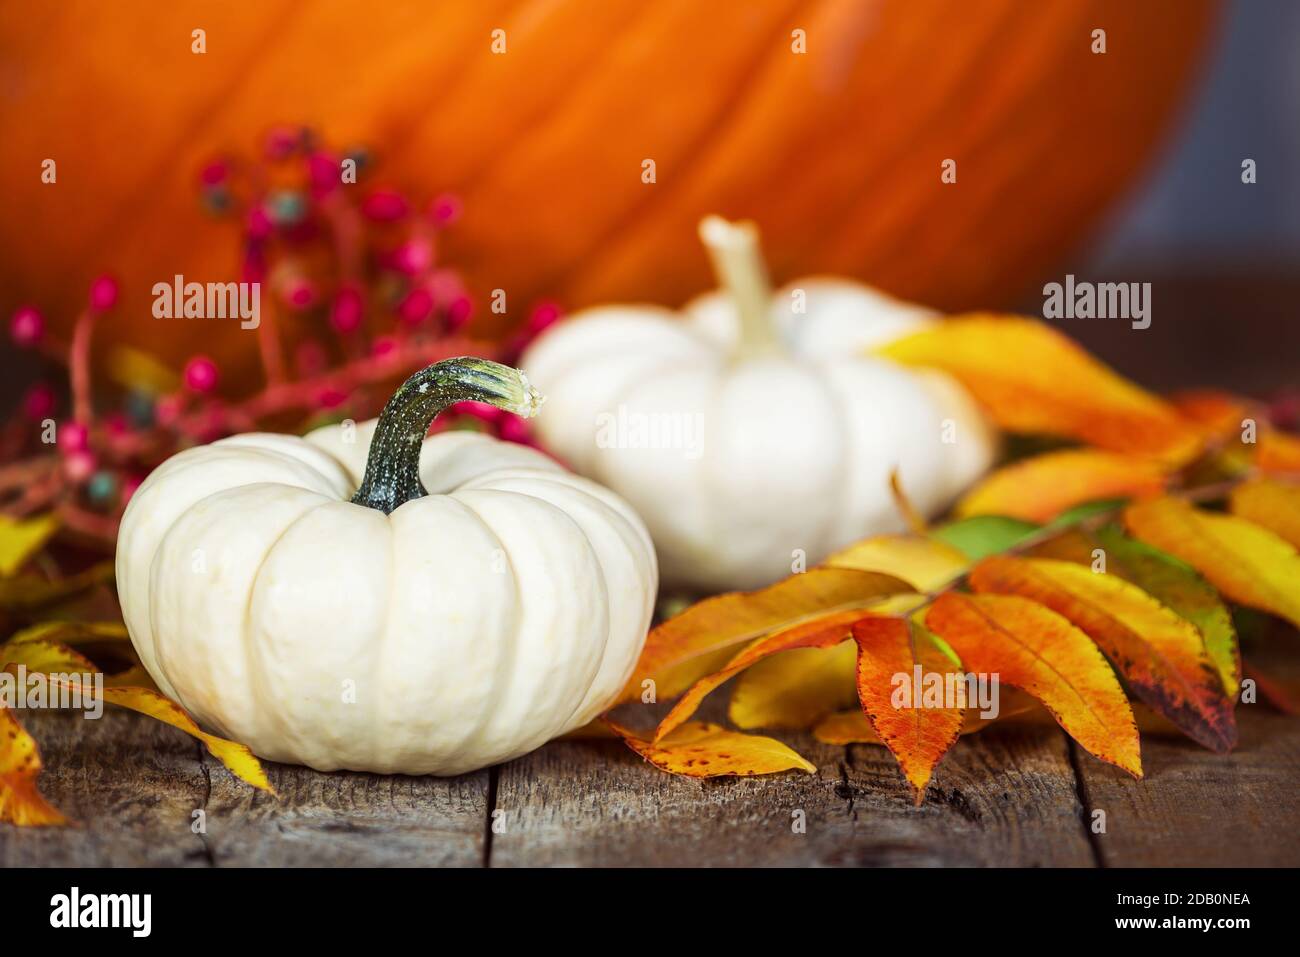 White Mini pumpkins on rustic wooden table. Displayed with colorful autumn leaves and berries. Pumpkins in the background. Stock Photo